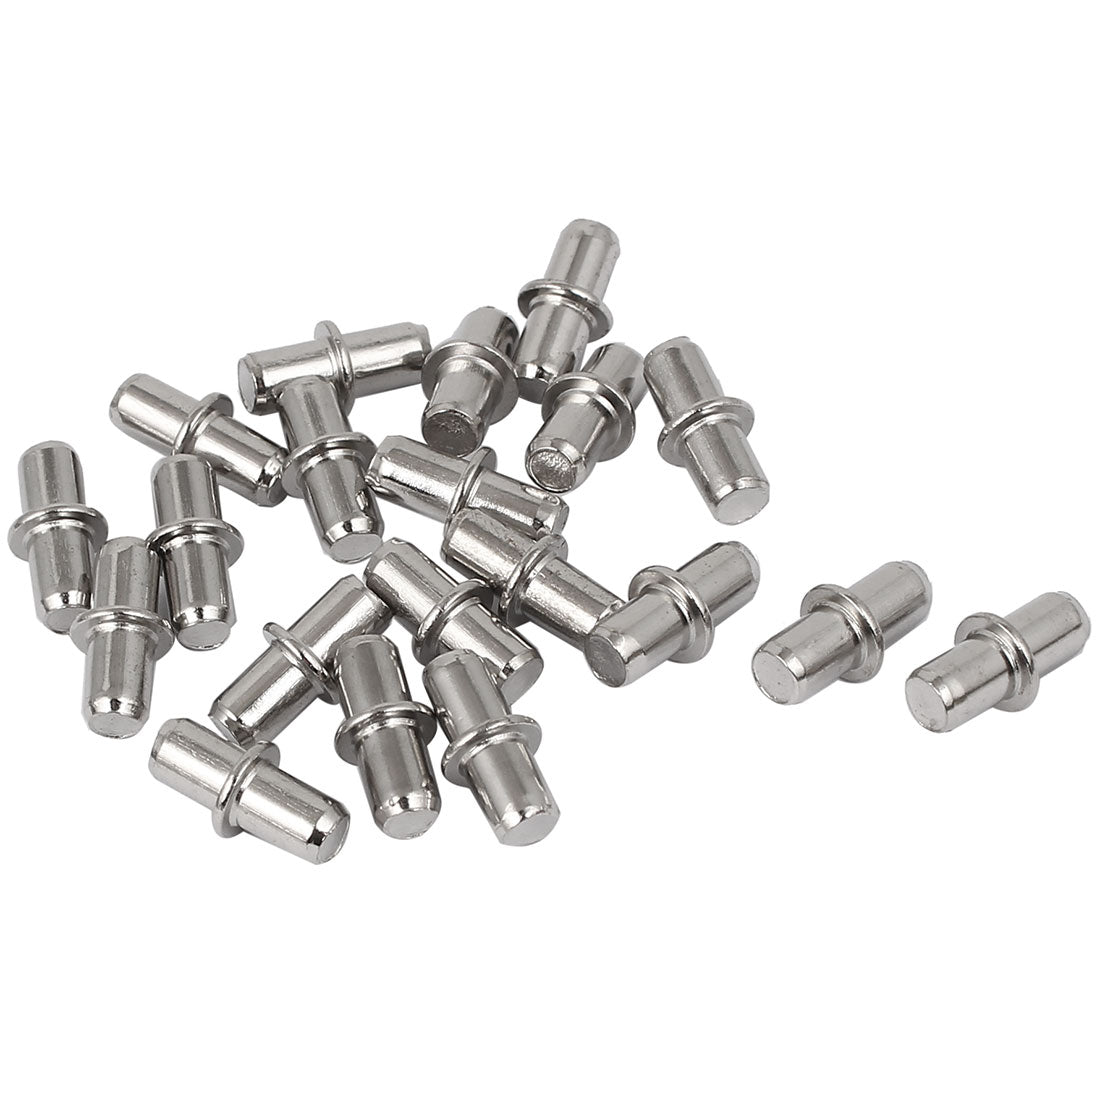 uxcell Uxcell 5mm Metal Furniture Cupboard Shelf Pins Pegs Supports Holder 20 Pcs